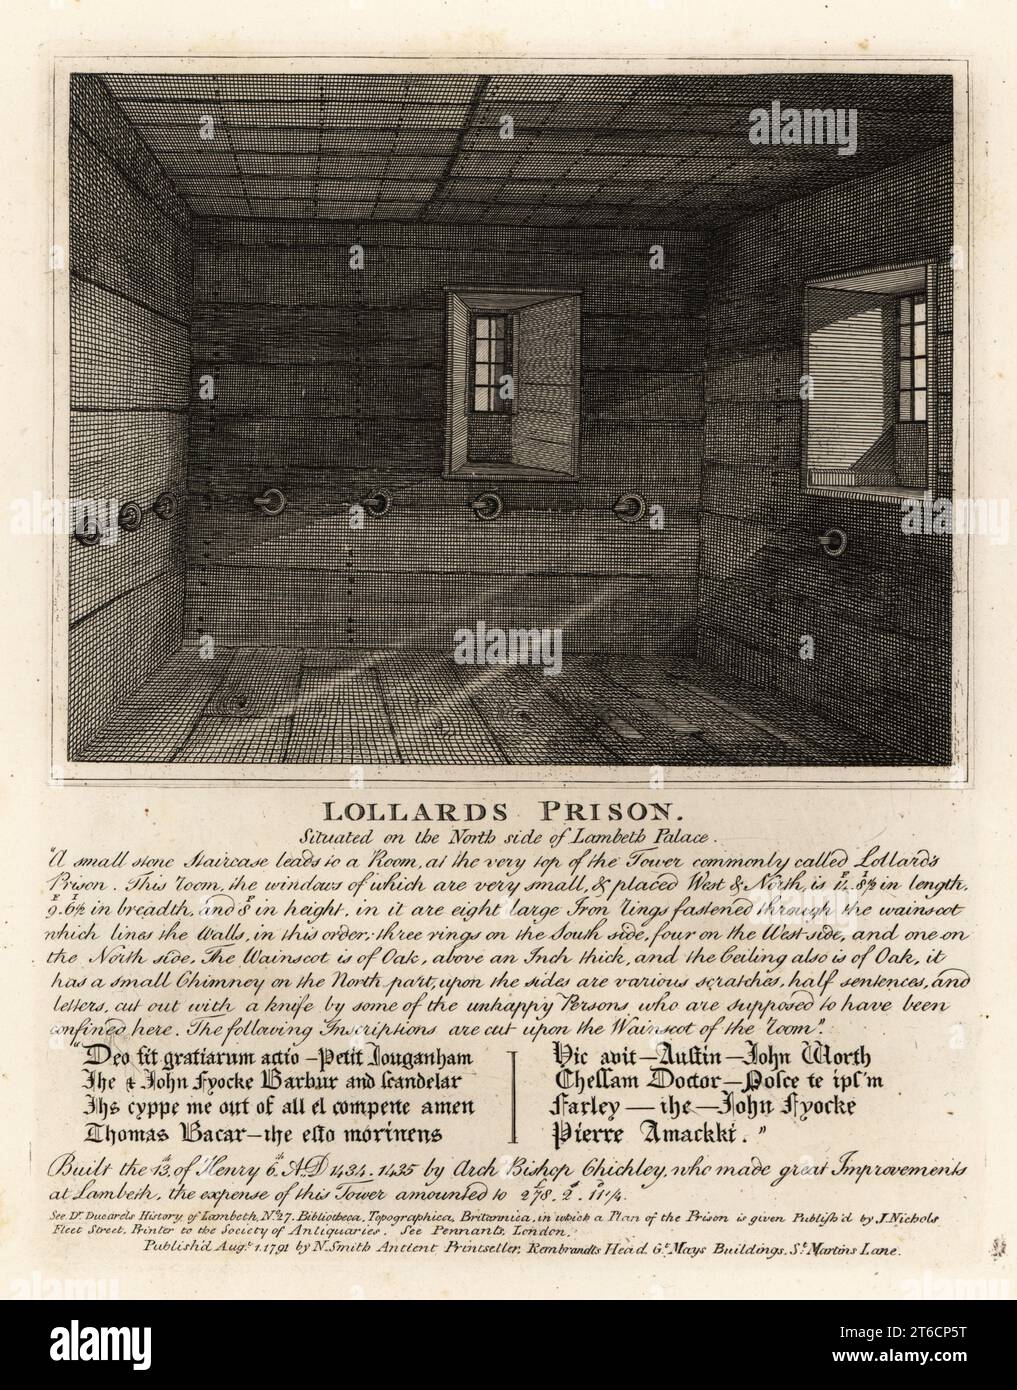 Lollards Prison, in the tower of Lambeth Palace. A room with oak ceiling and graffitied panels, small windows, and rings to secure prisoners. Built by Archbishop Chichley in 1435. Copperplate engraving by John Thomas Smith after original drawings by members of the Society of Antiquaries from his J.T. Smiths Antiquities of London and its Environs, J. Sewell, R. Folder, J. Simco, London, 1791. Stock Photo